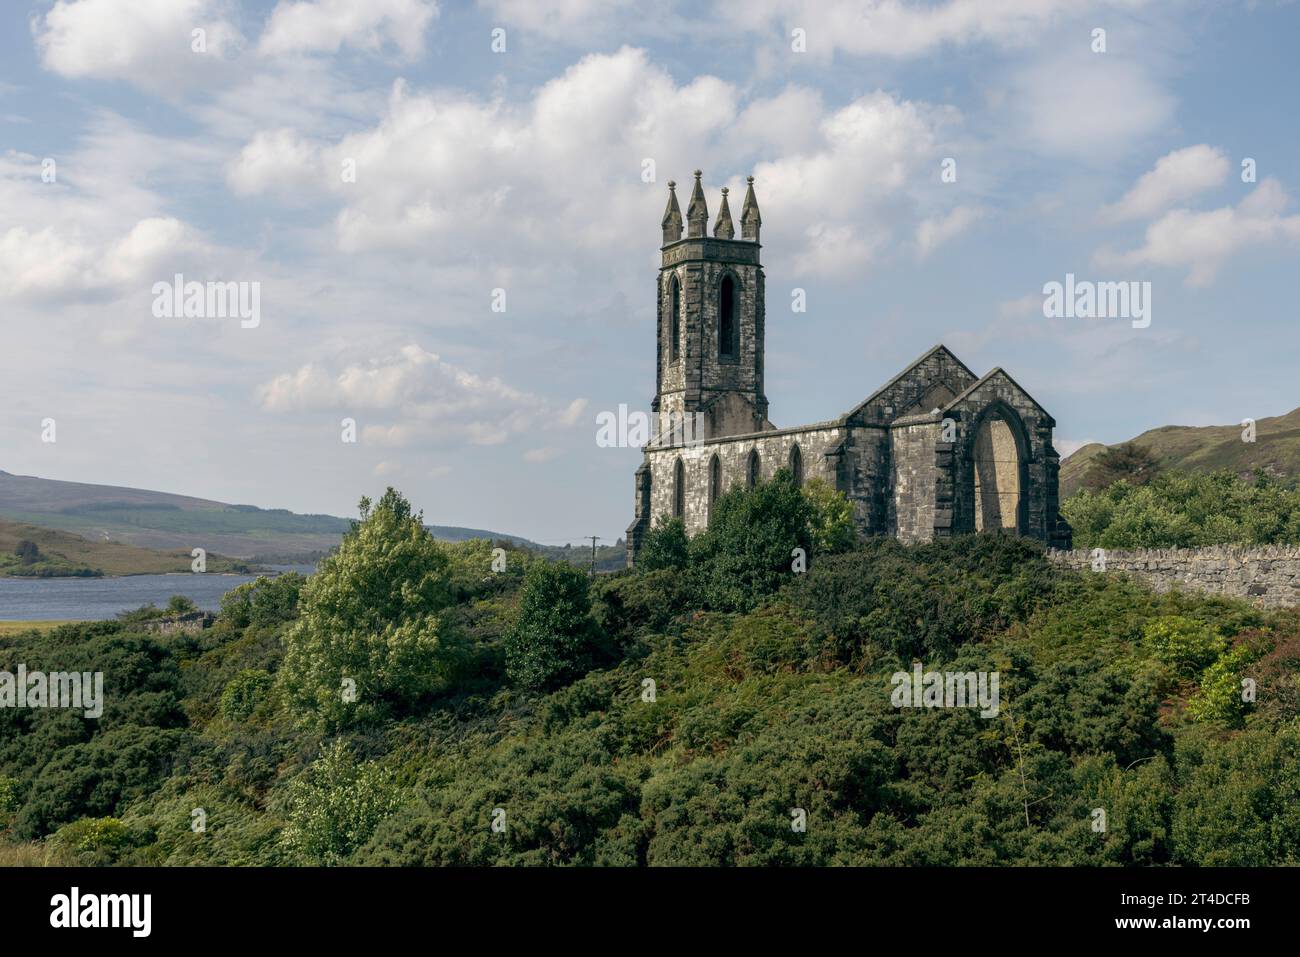 The abandoned Dunlewey Church in Ireland is a picturesque ruin with a romantic and haunting atmosphere. Stock Photo